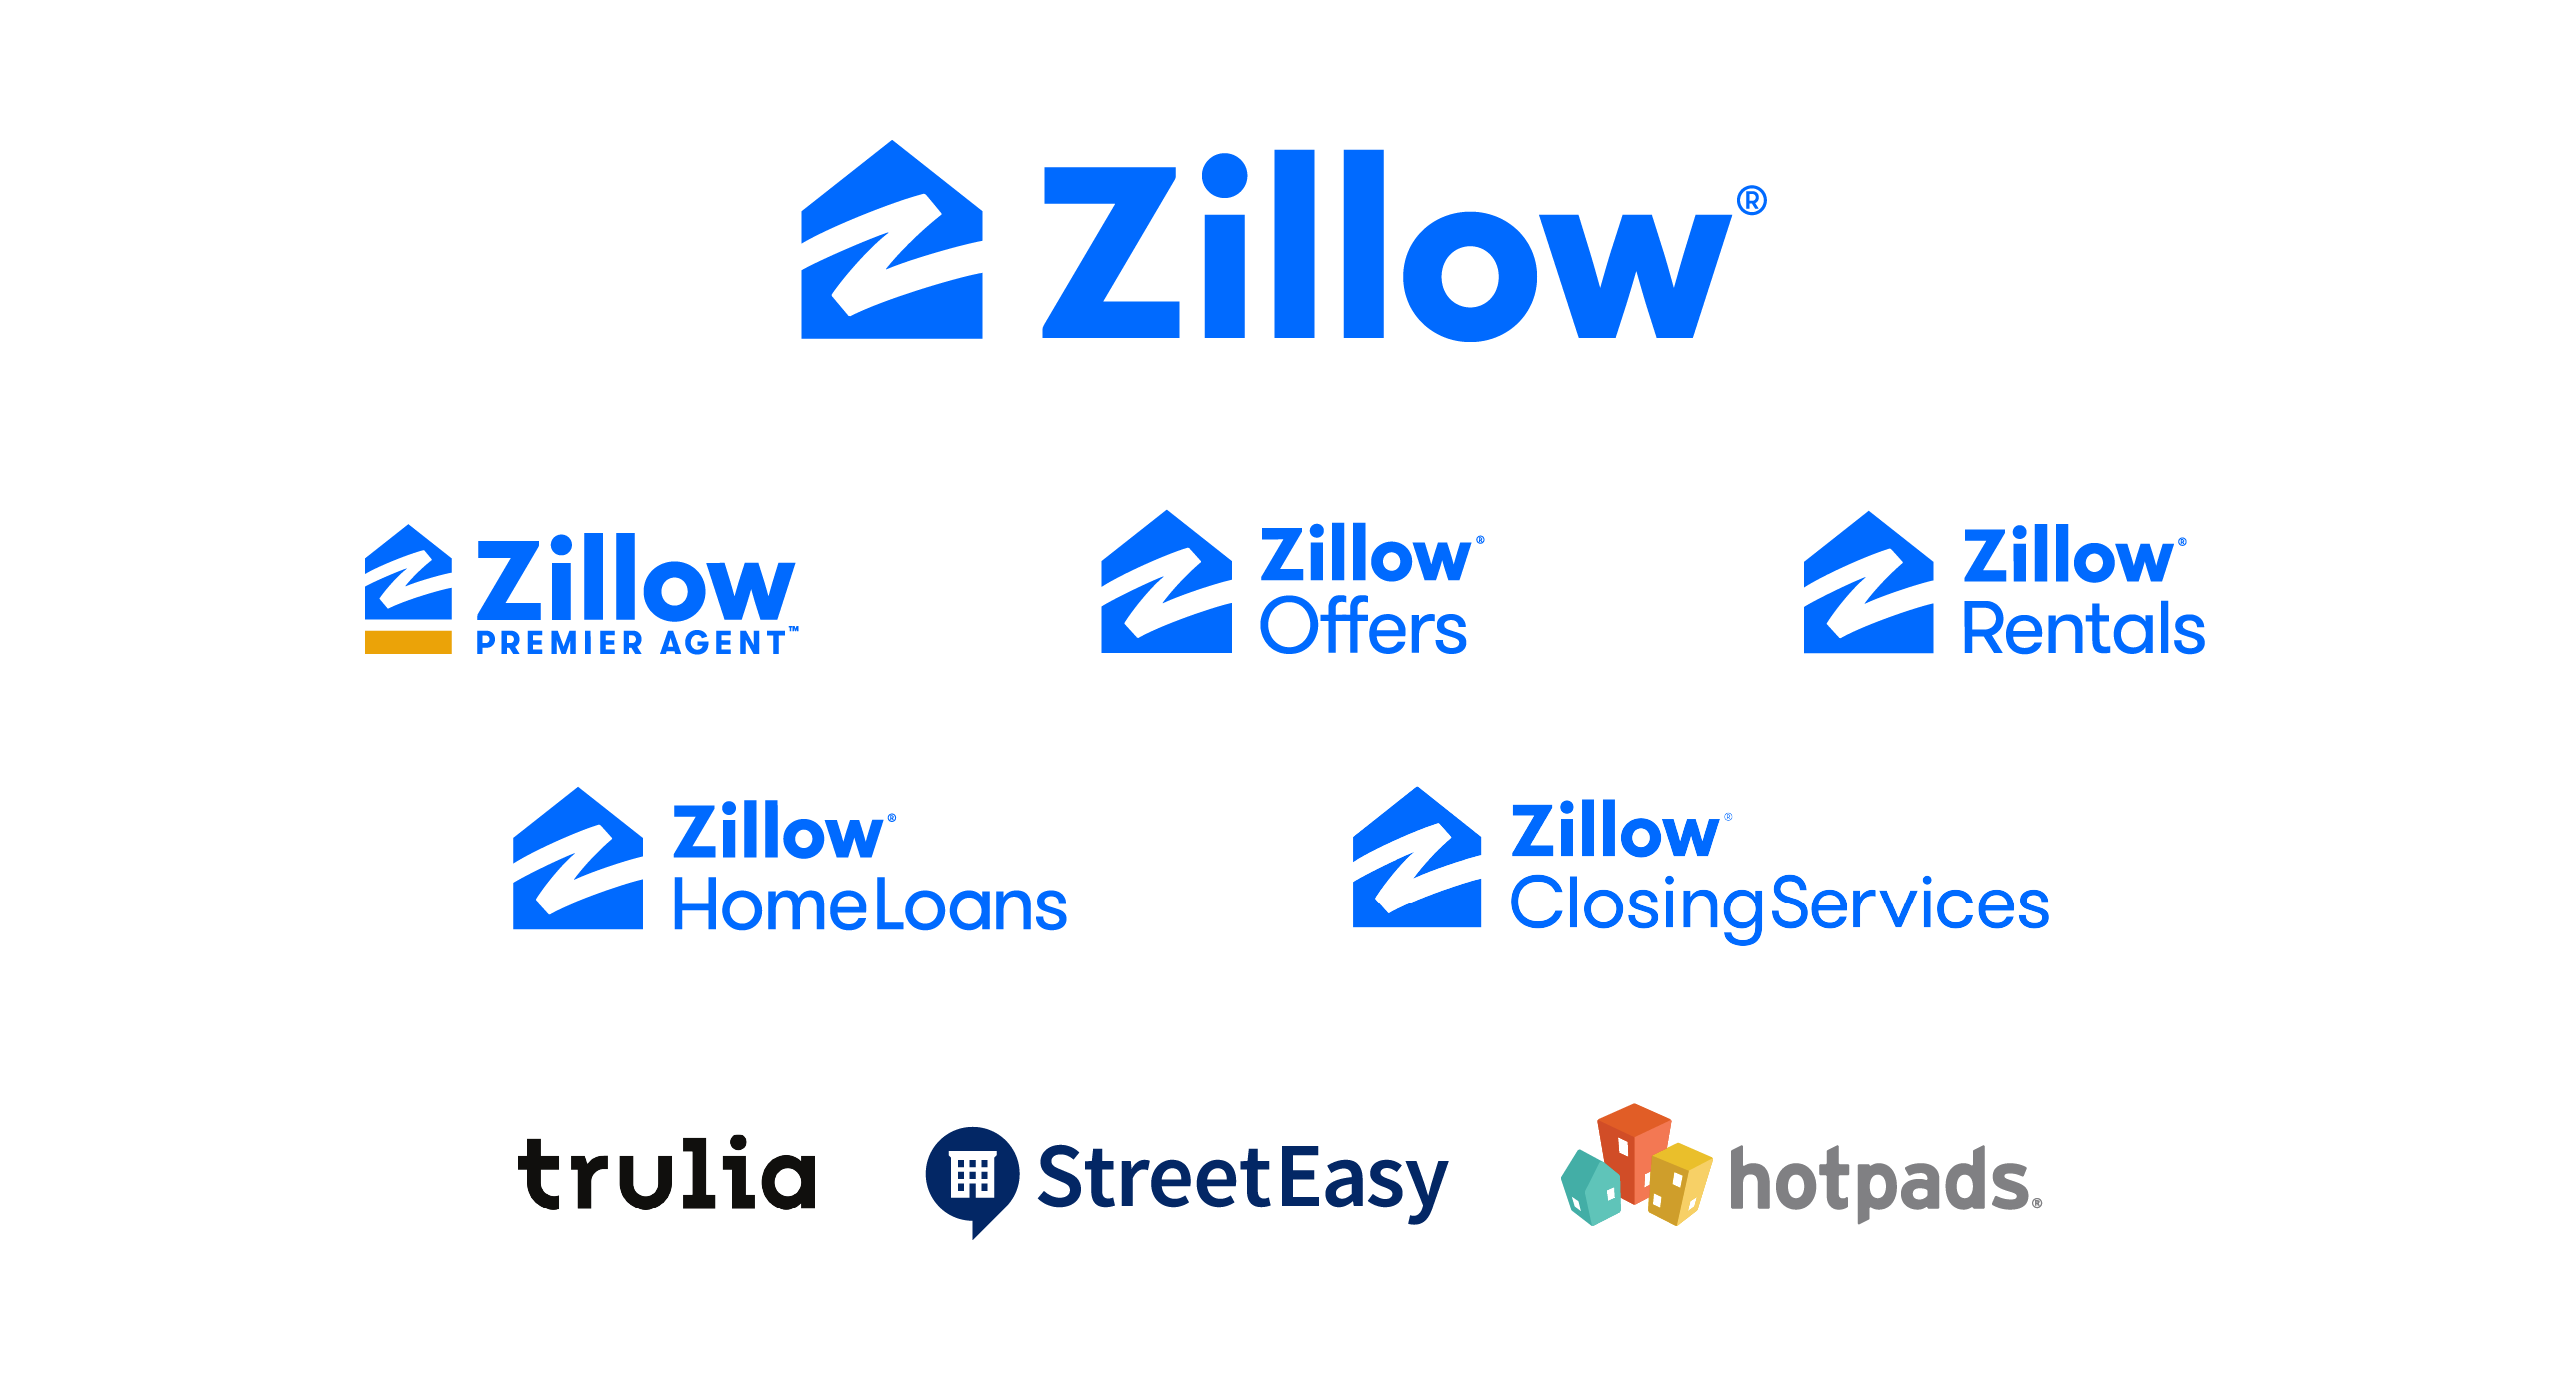 Adapting to COVID Reality, Zillow Produces New Ad Entirely From Home -  Zillow Group